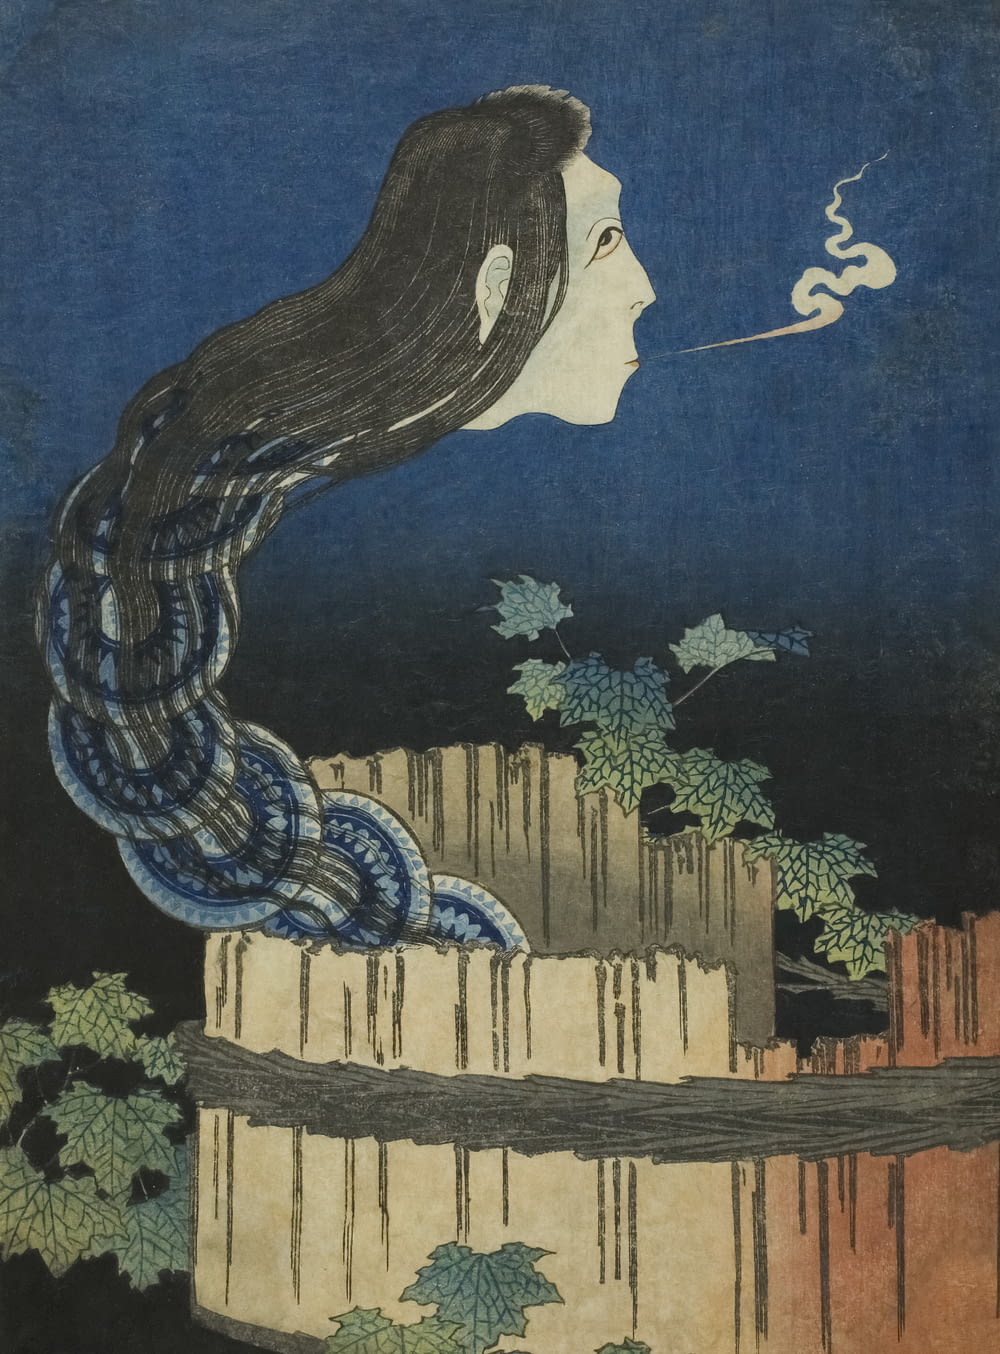 a painting of a woman smoking a cigarette